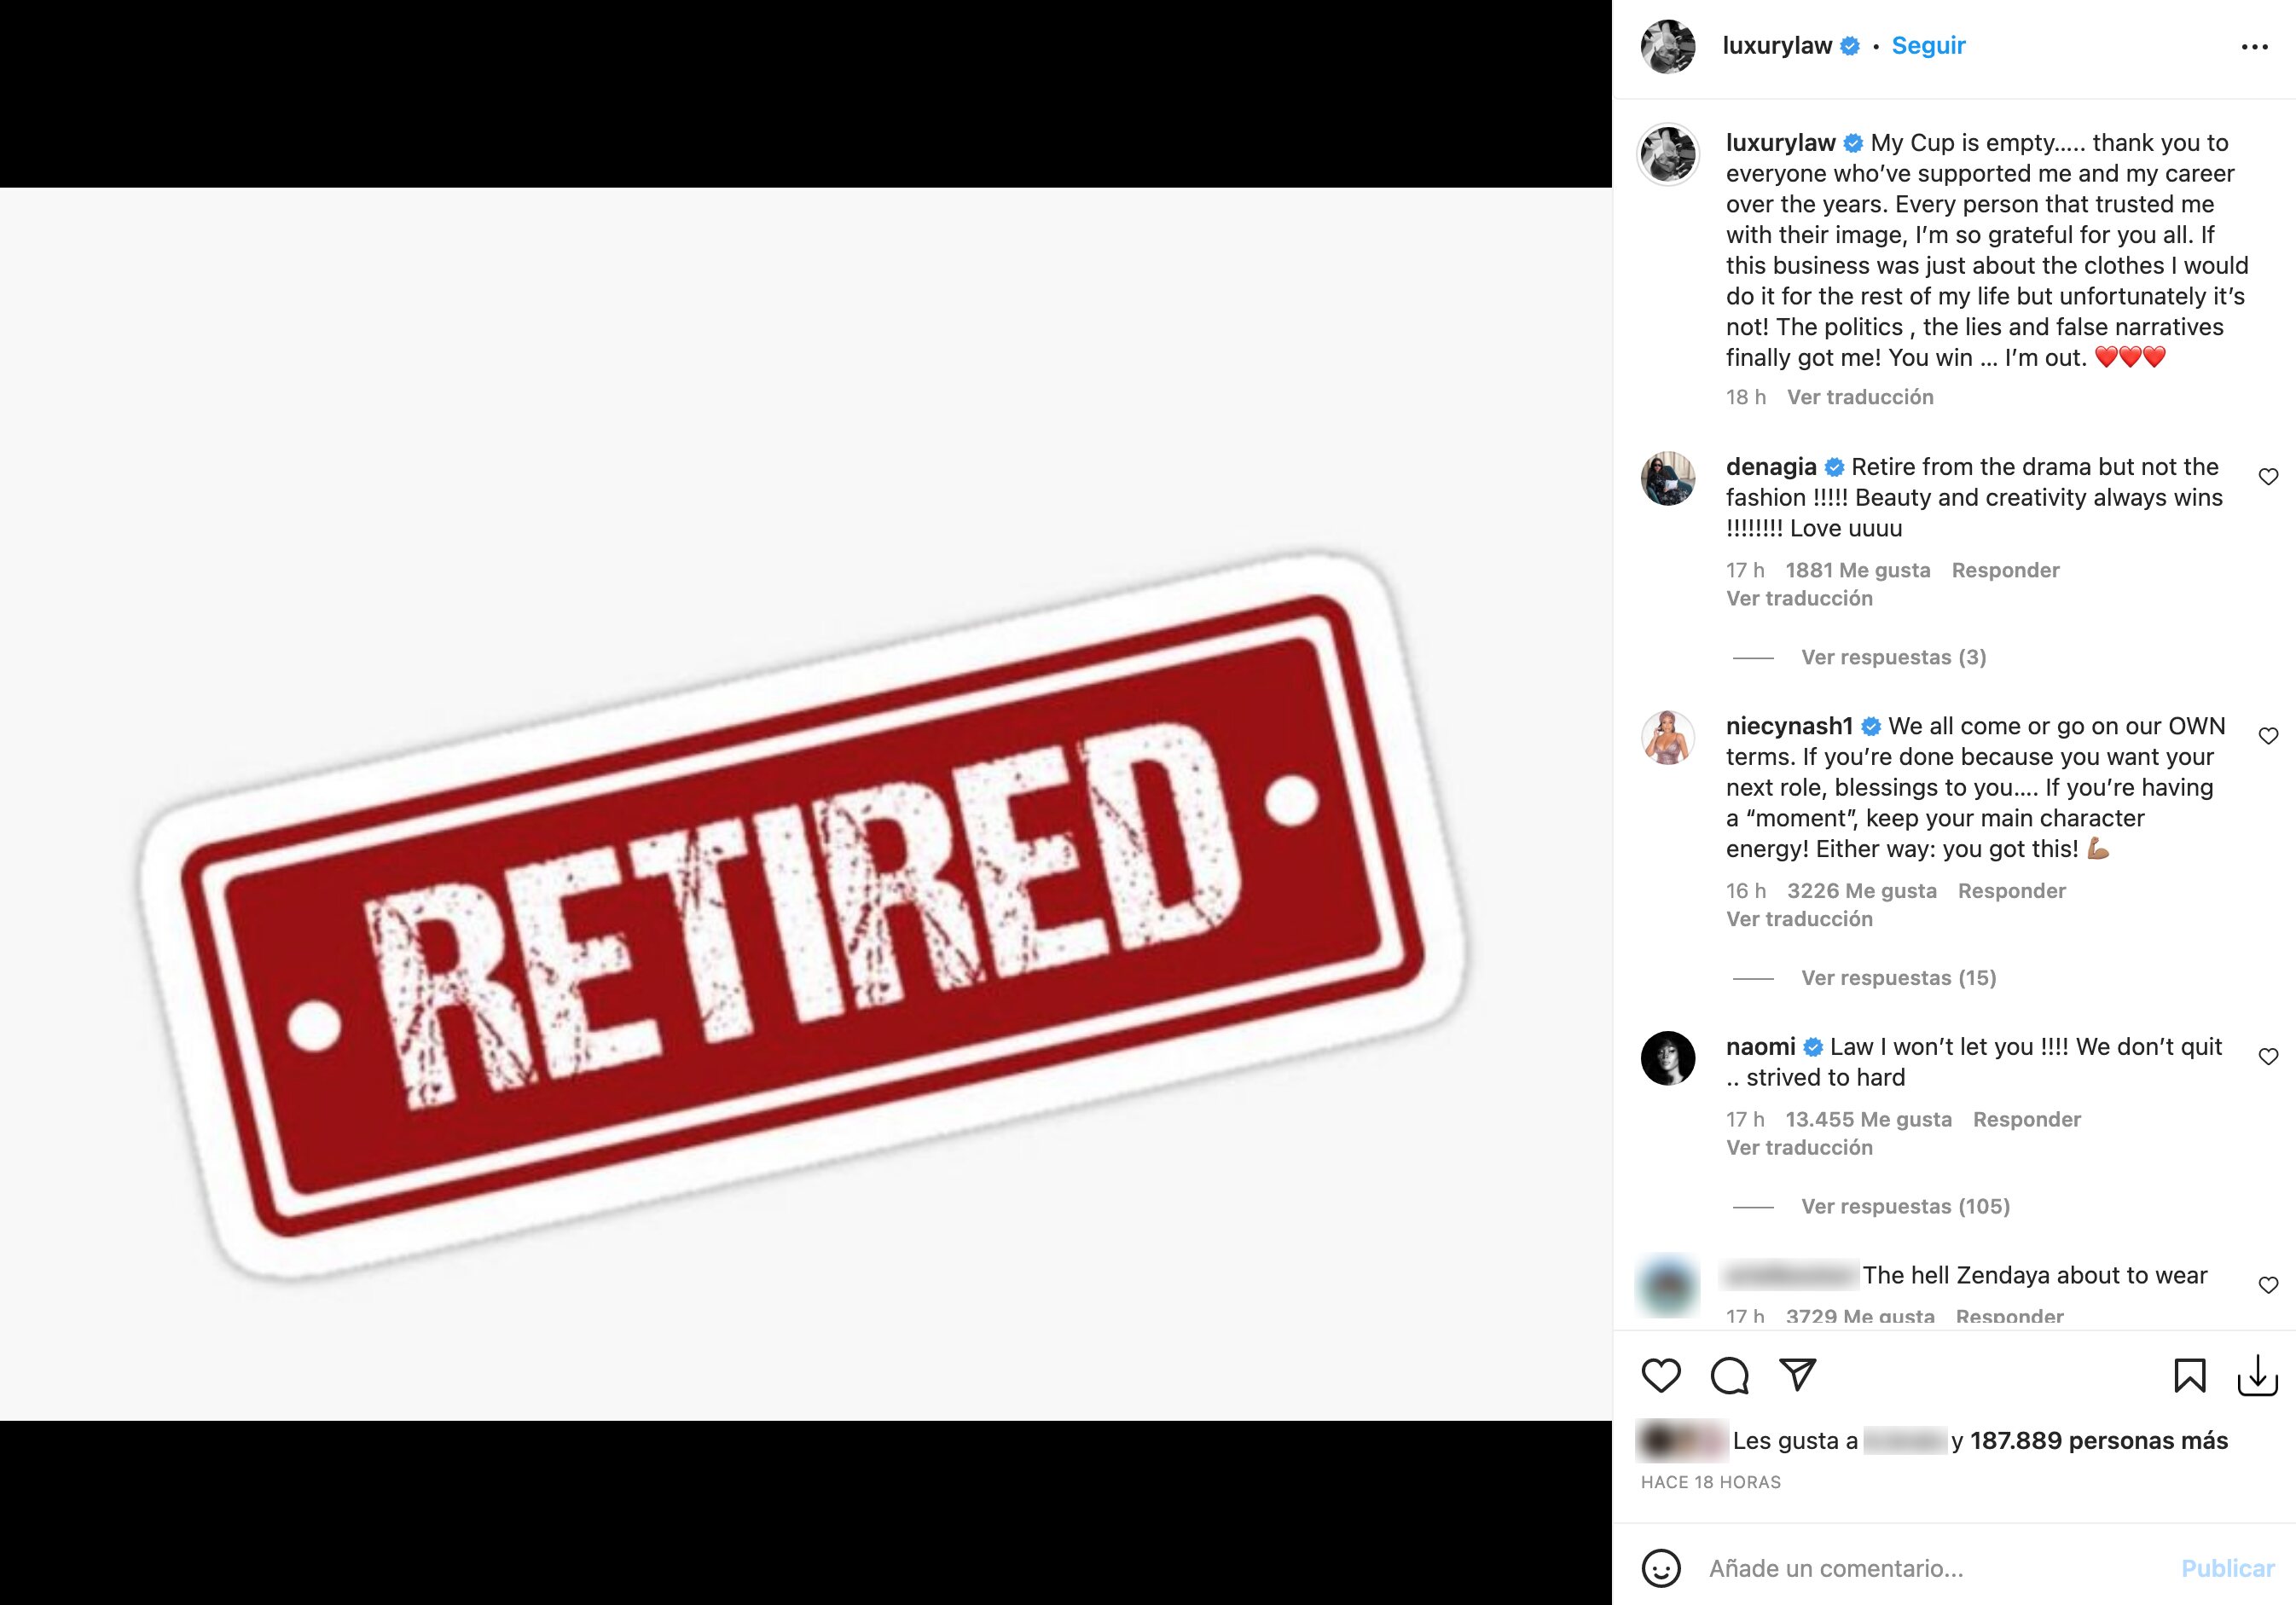 Law Roach announced his retirement through his Instagram account